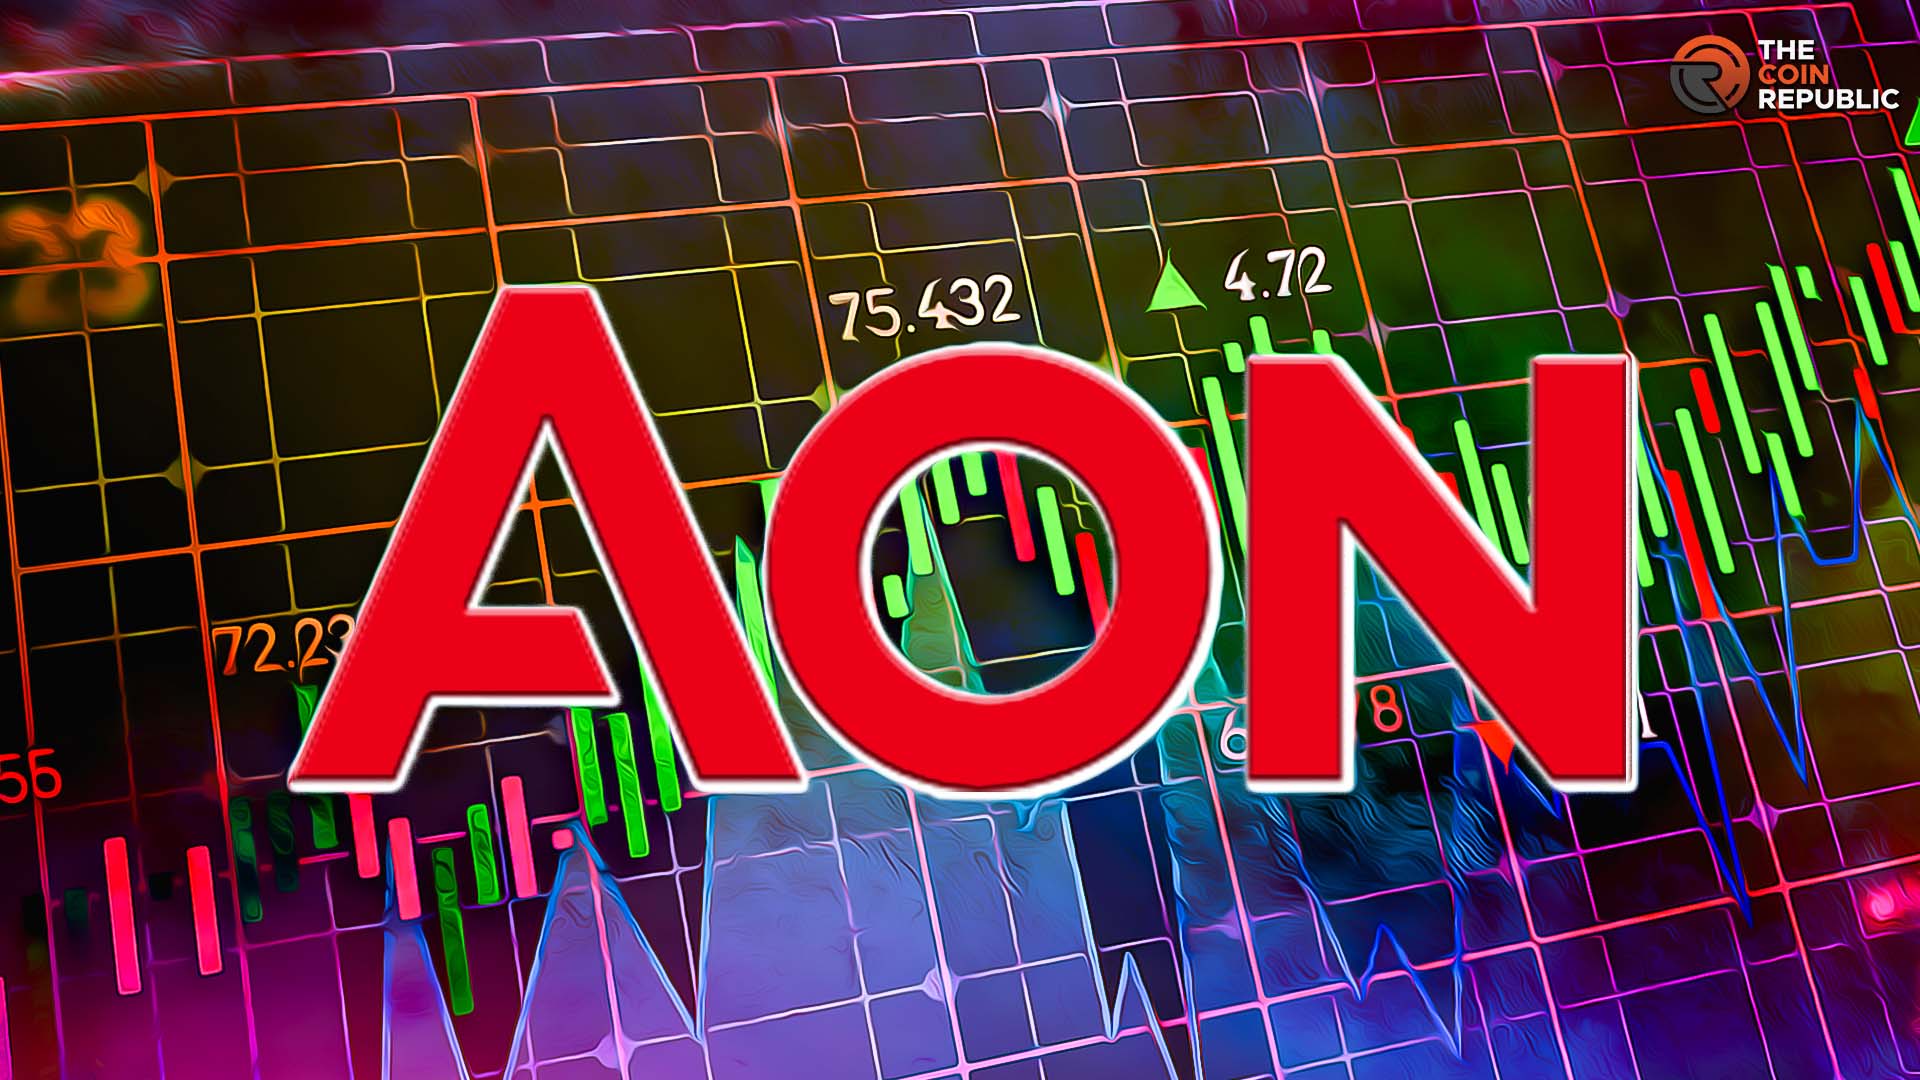 AON Stock Lost $1.96 Intraday; Indication of Selling?